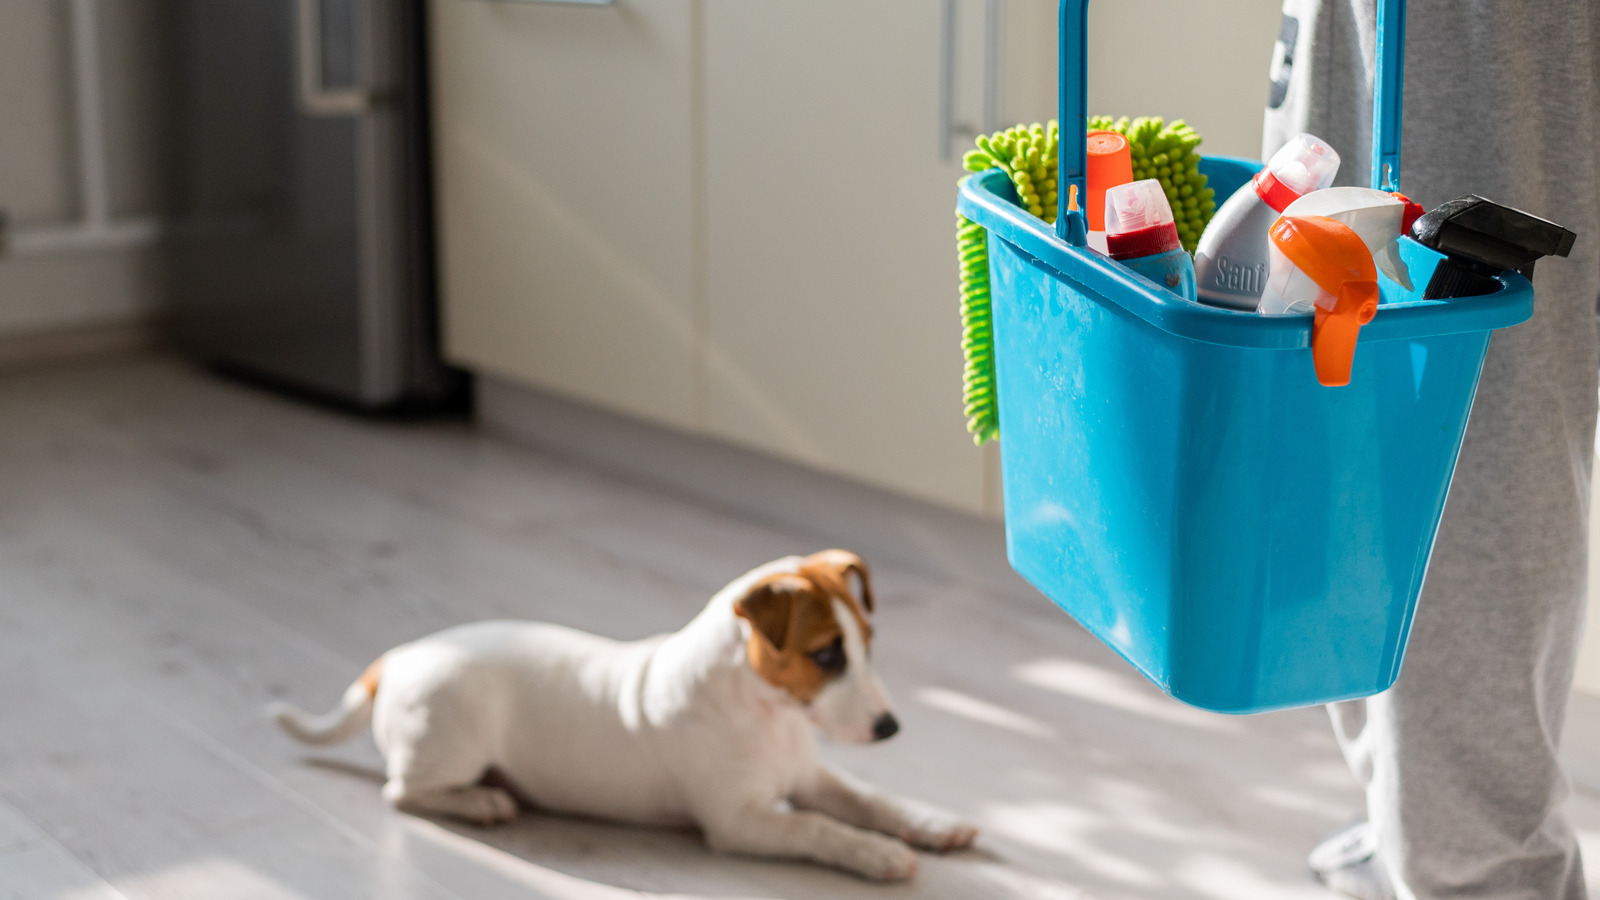 https://www.thelist.com/img/gallery/heres-how-to-make-cleaning-supplies-that-are-safe-for-pets/l-intro-1621444451.jpg